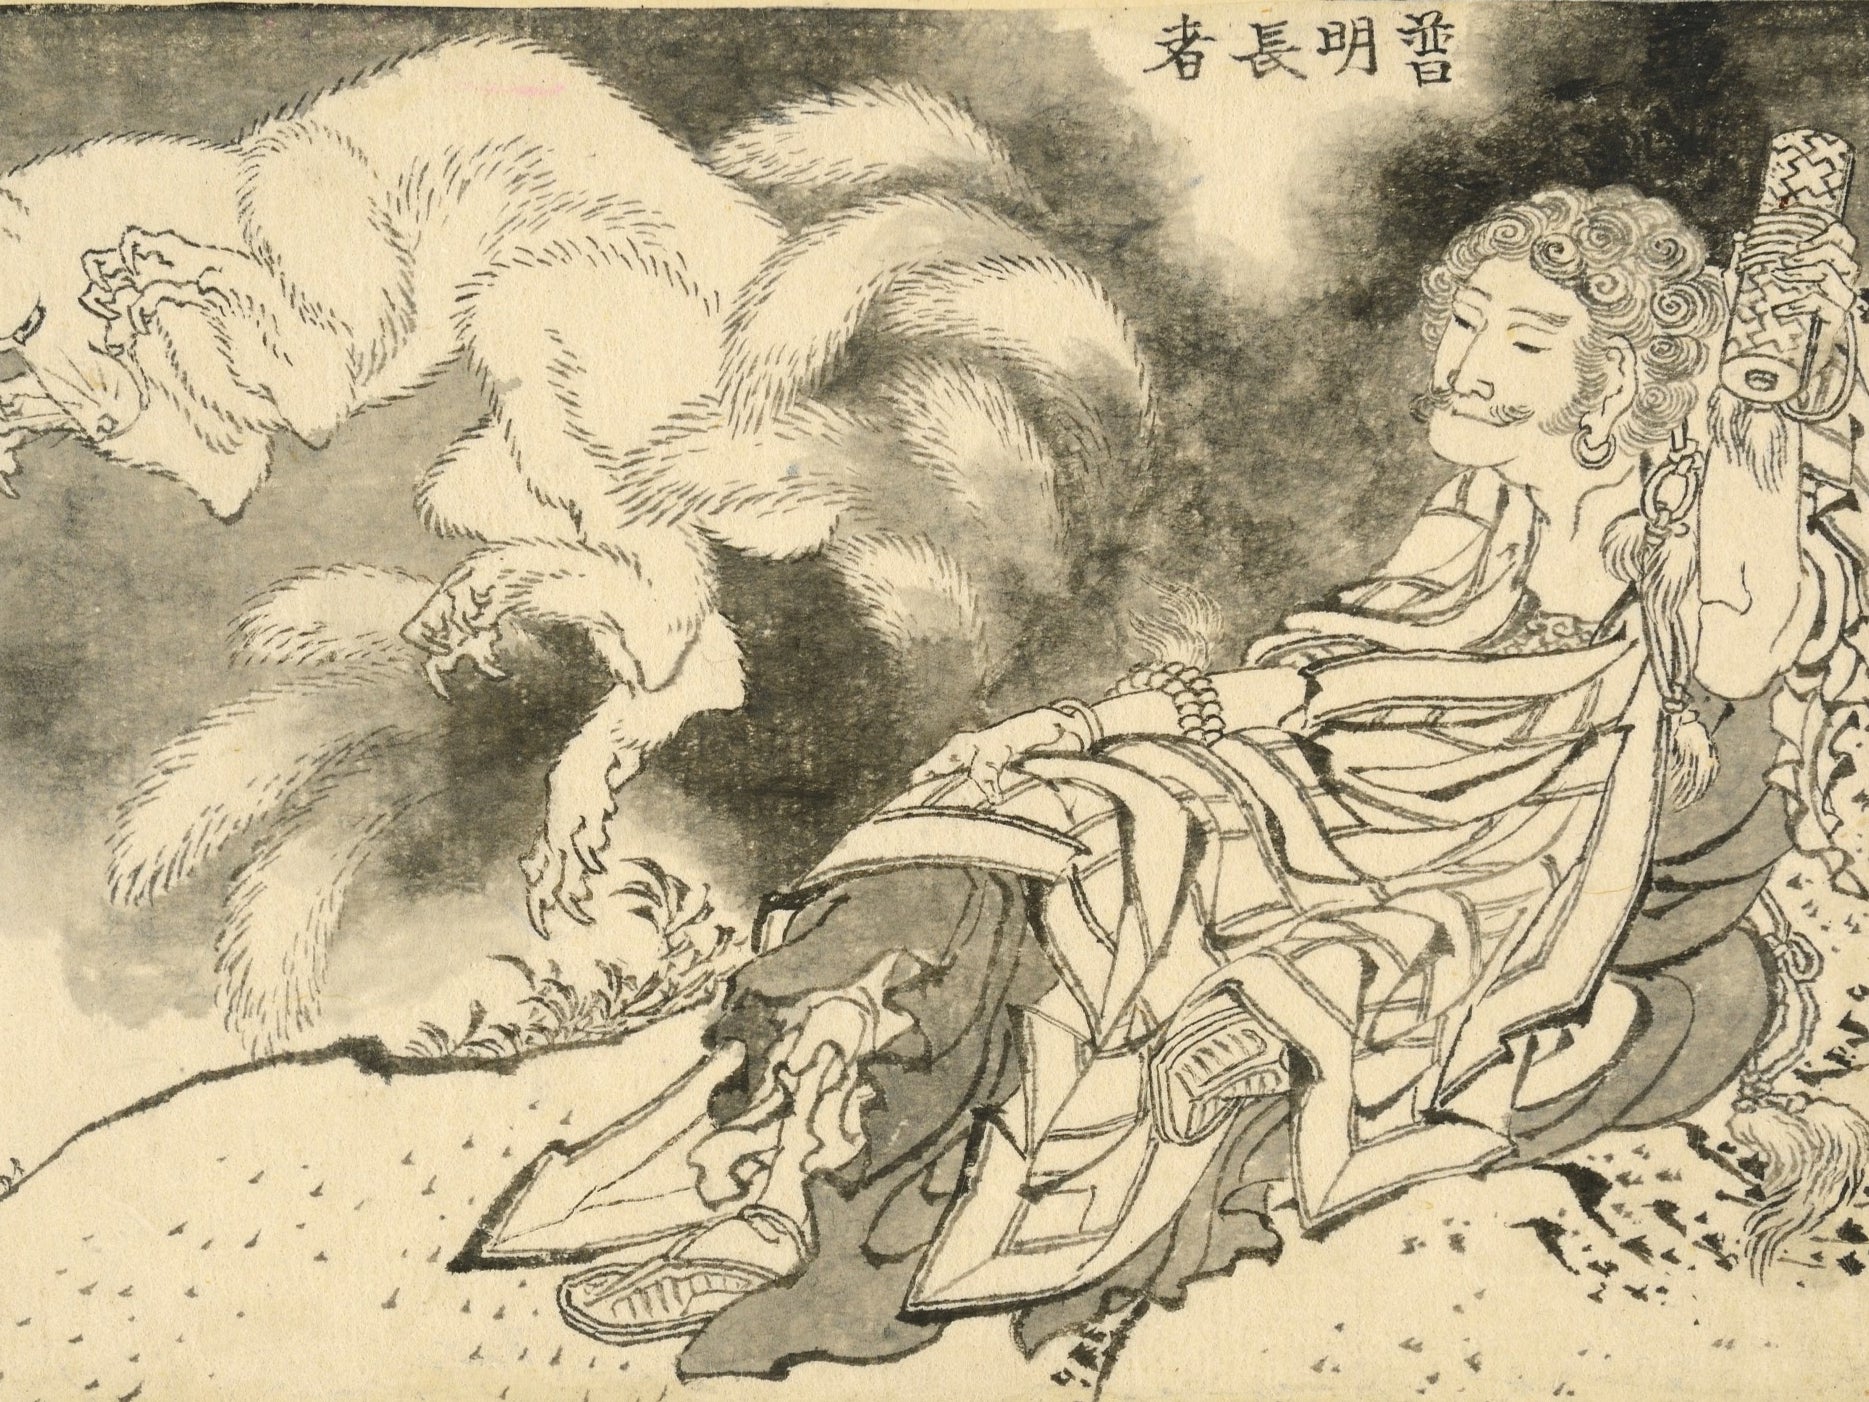 ‘Fumei Chōja and the nine-tailed spirit fox’: Fumei Chōja appears as a character in kabuki and bunraku plays which also feature the shape-shifting nine-tailed fox and its adventures in India, China and Japan